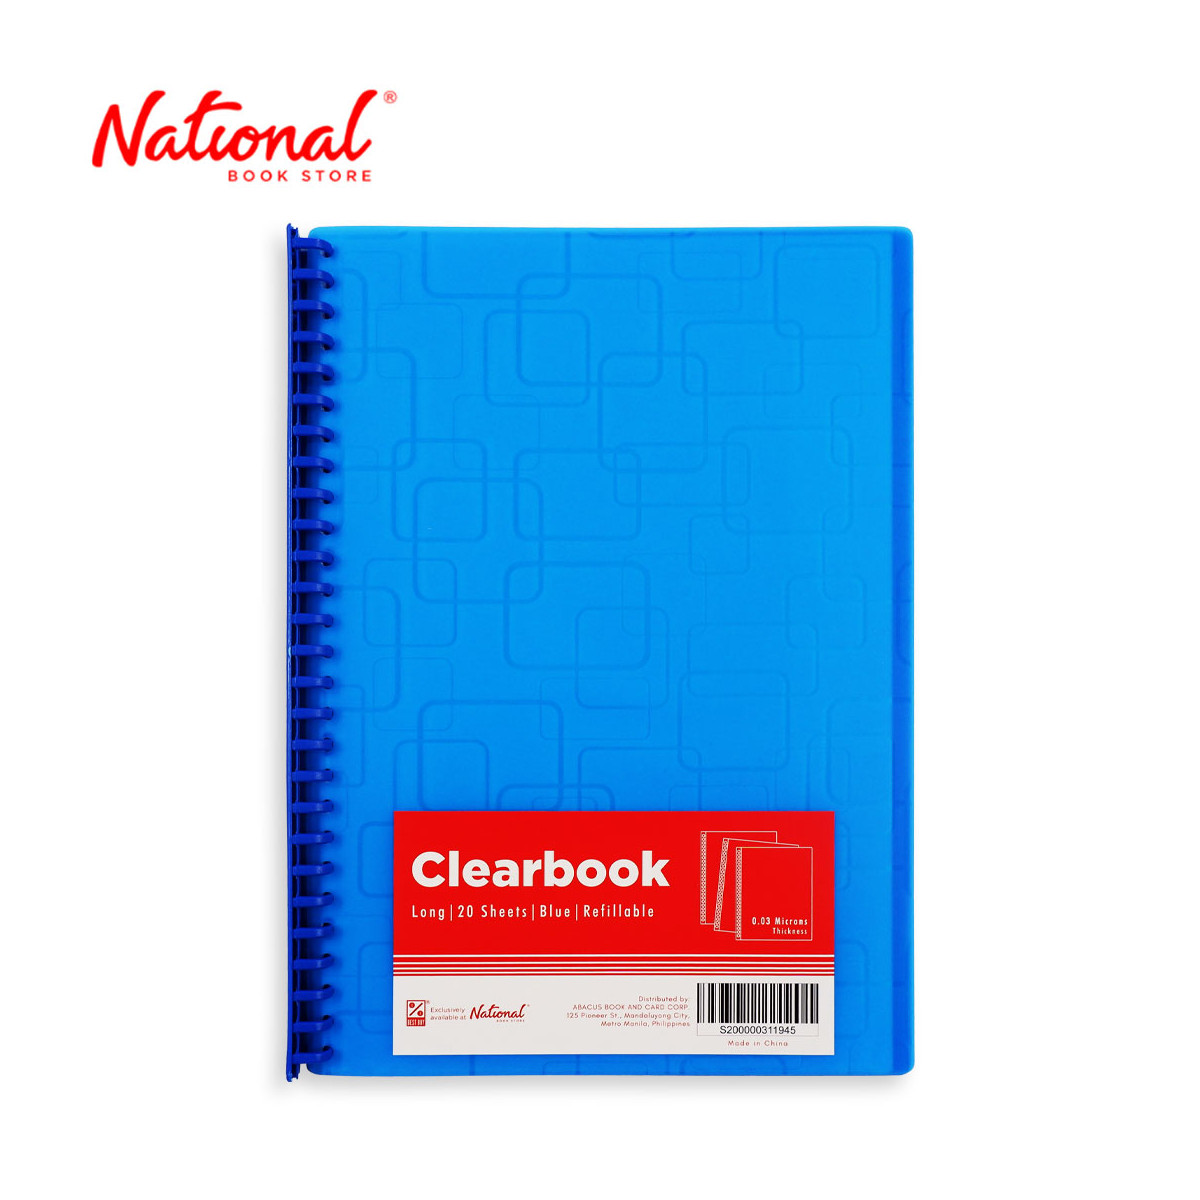 Best Buy Clearbook Refillable WW-83S-FC-blu Long Blue 20 sheets 27 holes Big Square Design